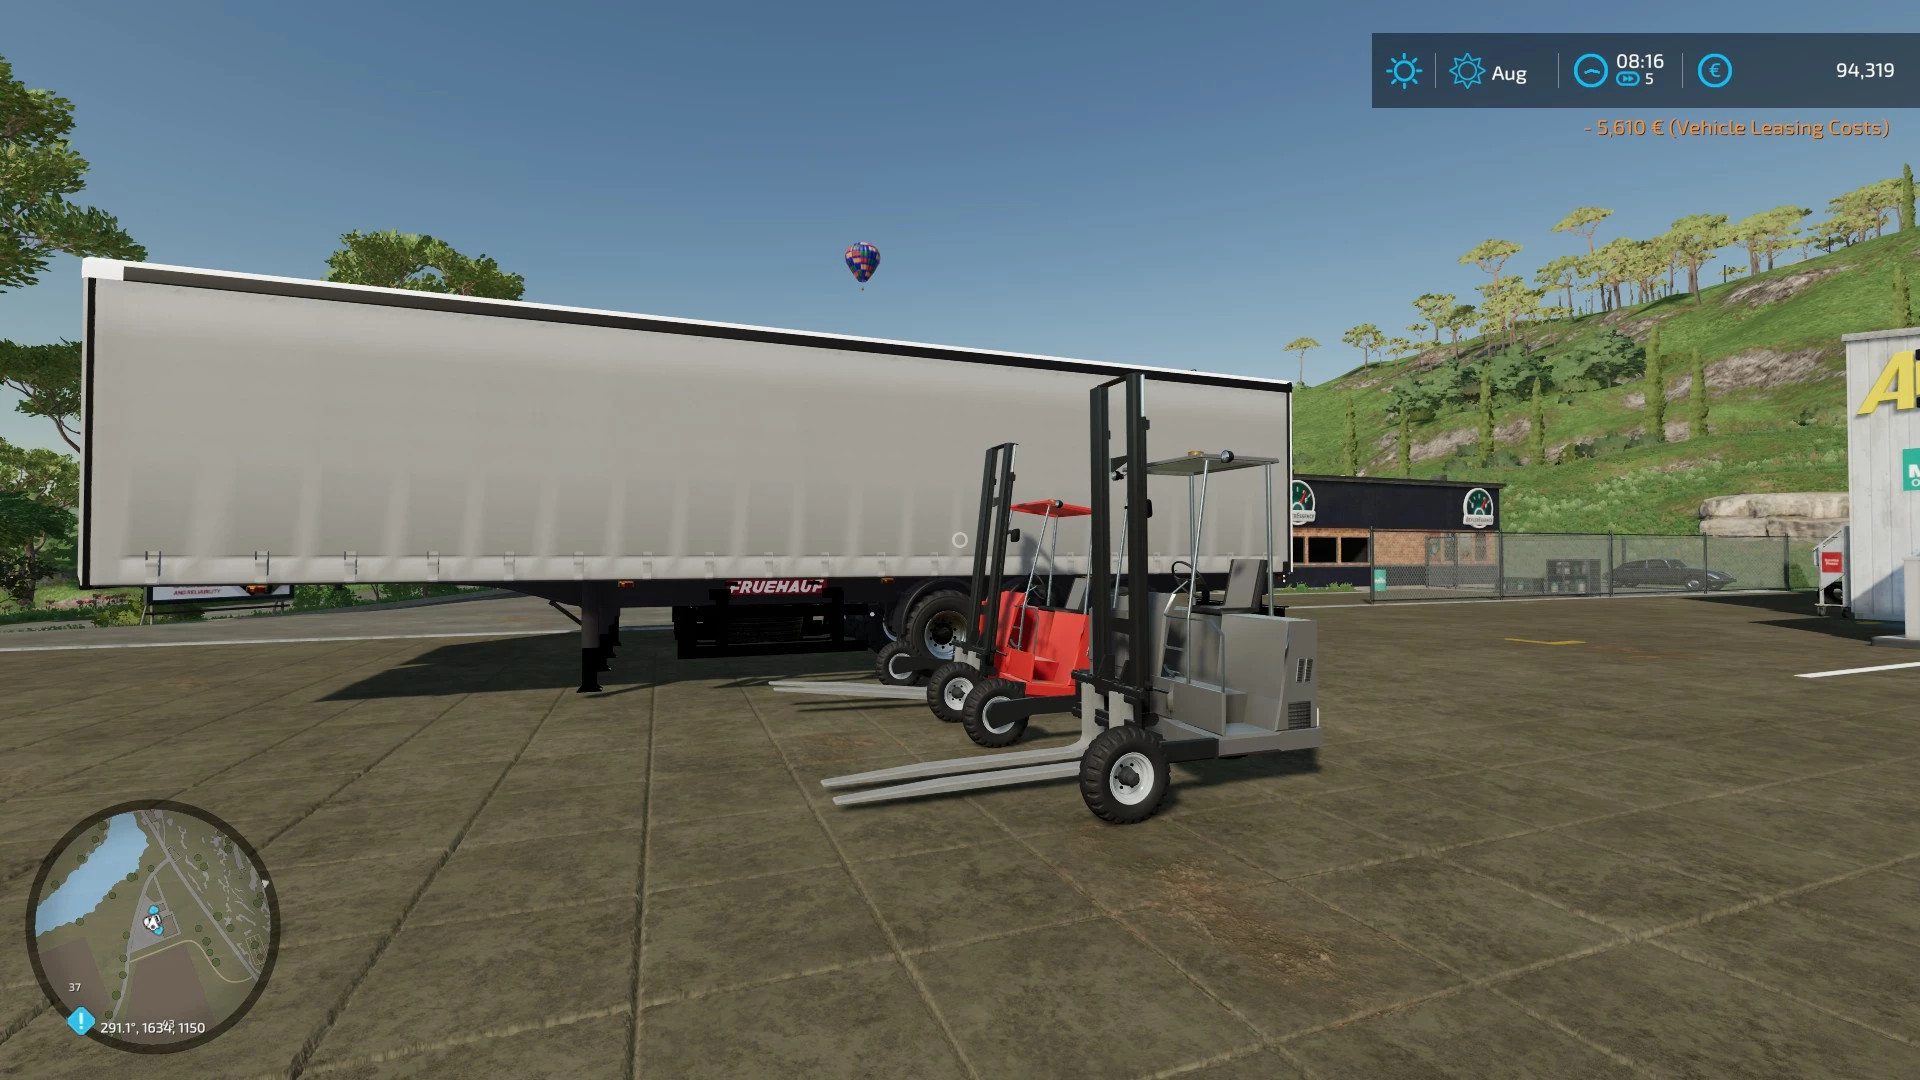 Trailer with forklift